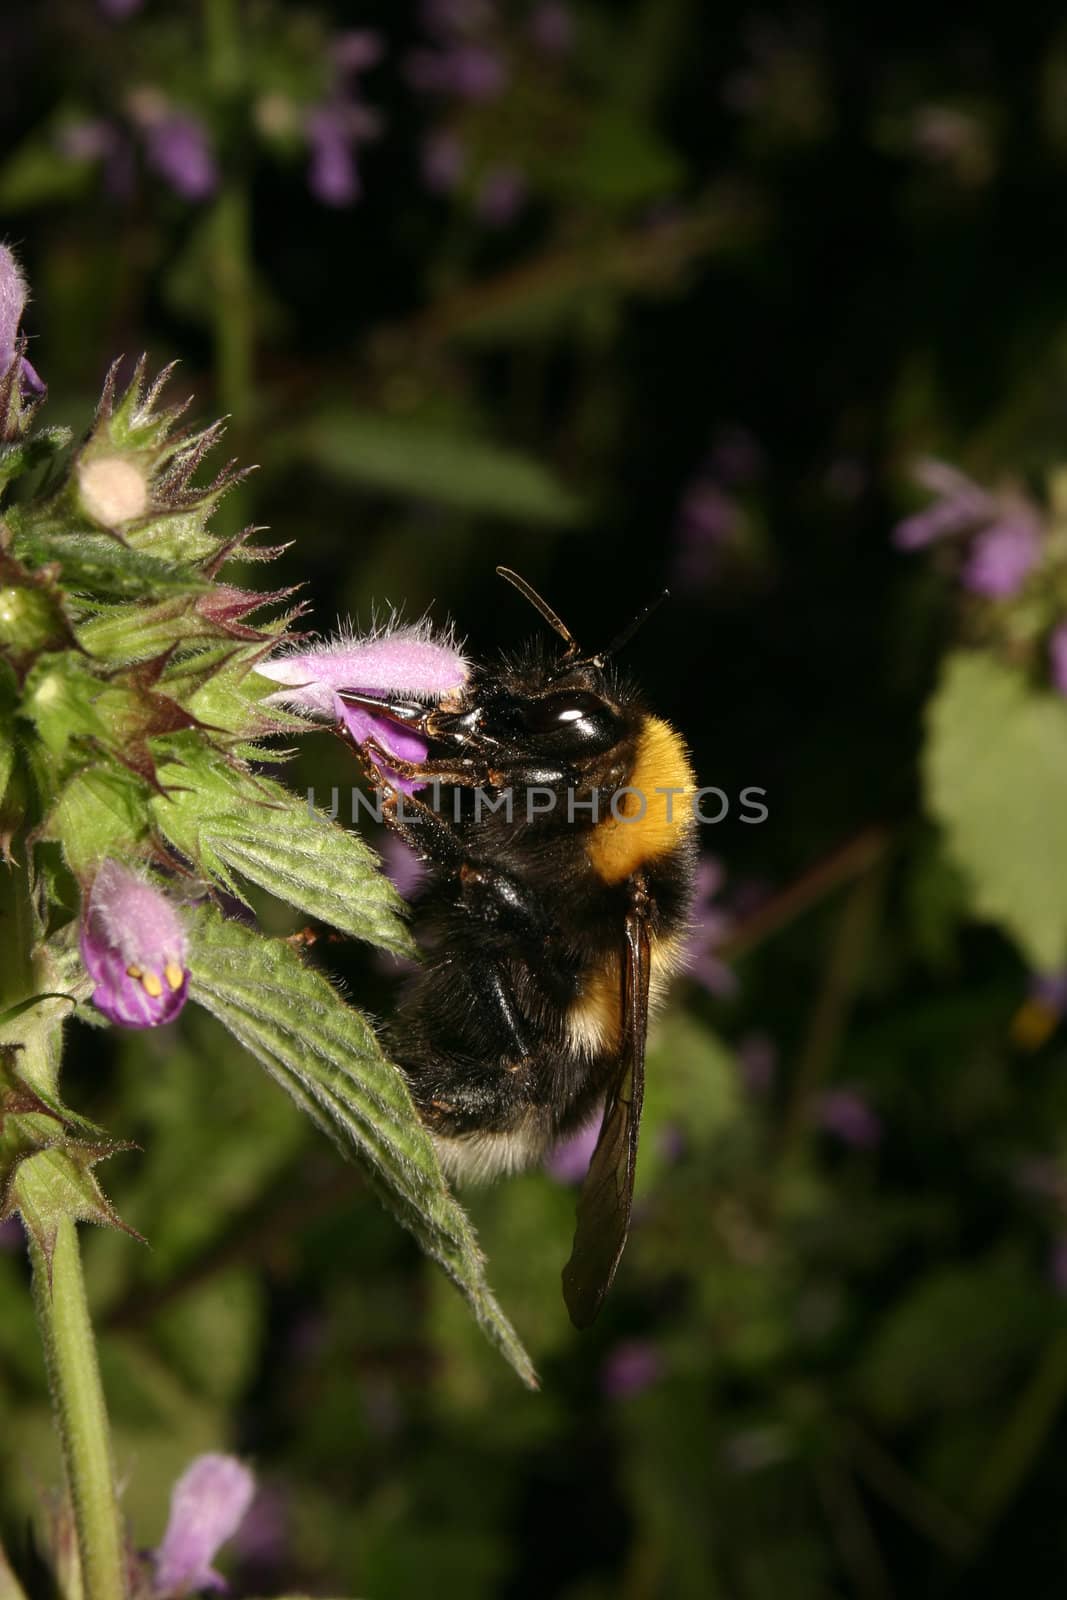 Large Earth Bumblebee (Bombus terrestris) by tdietrich